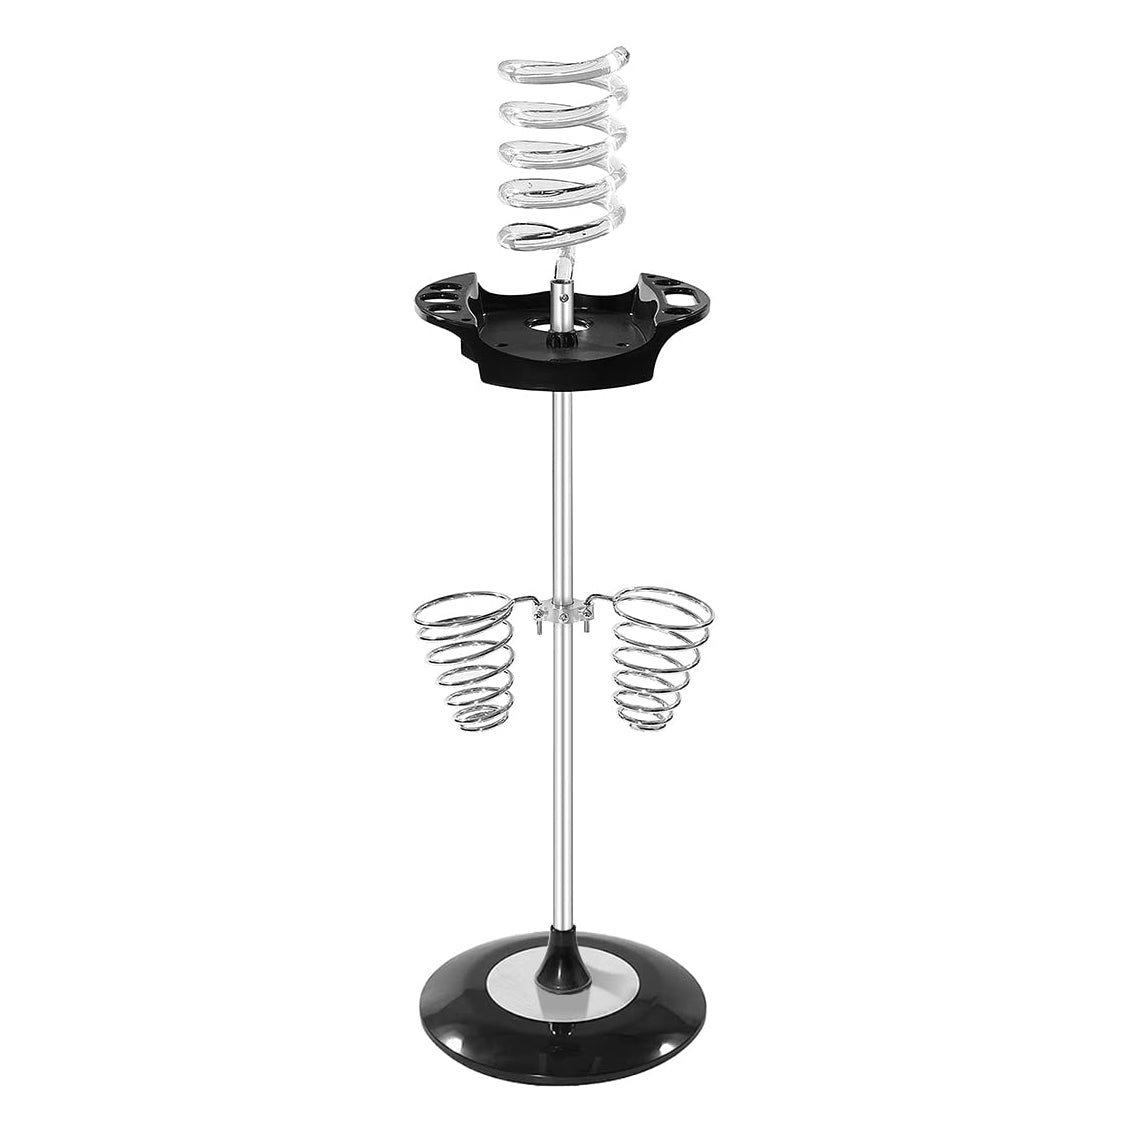 Hair Dryer Stand with Tray Acrylic and Two Spiral Holders | D0095-1S | Barber and Stylist Hair Salon Accessories - SH Salons